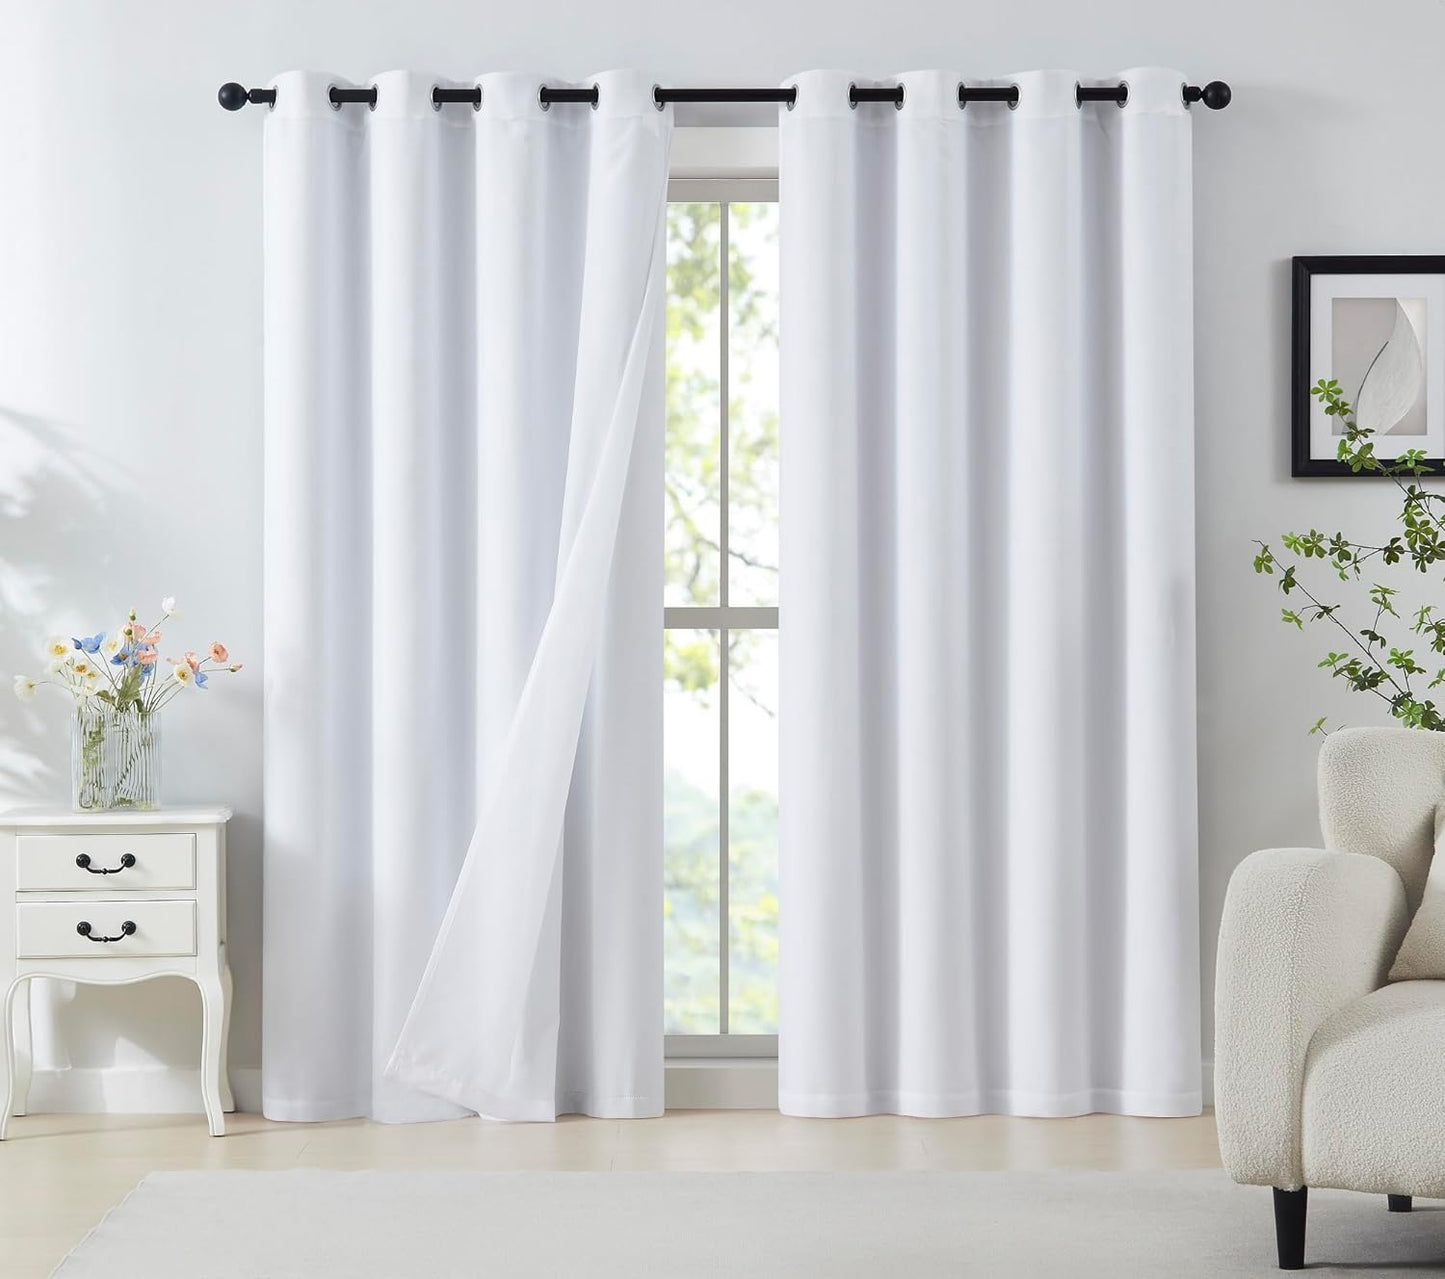 Mix and Match Blackout Curtains - Bedroom Solid Black Full Blackout Window Panels & Black Chiffon Sheer Curtains Thermal Insulated Drapes for Living Room, Grommet, 52" W X 63" L, Set of 4  Purainbow White 52" X 63" 